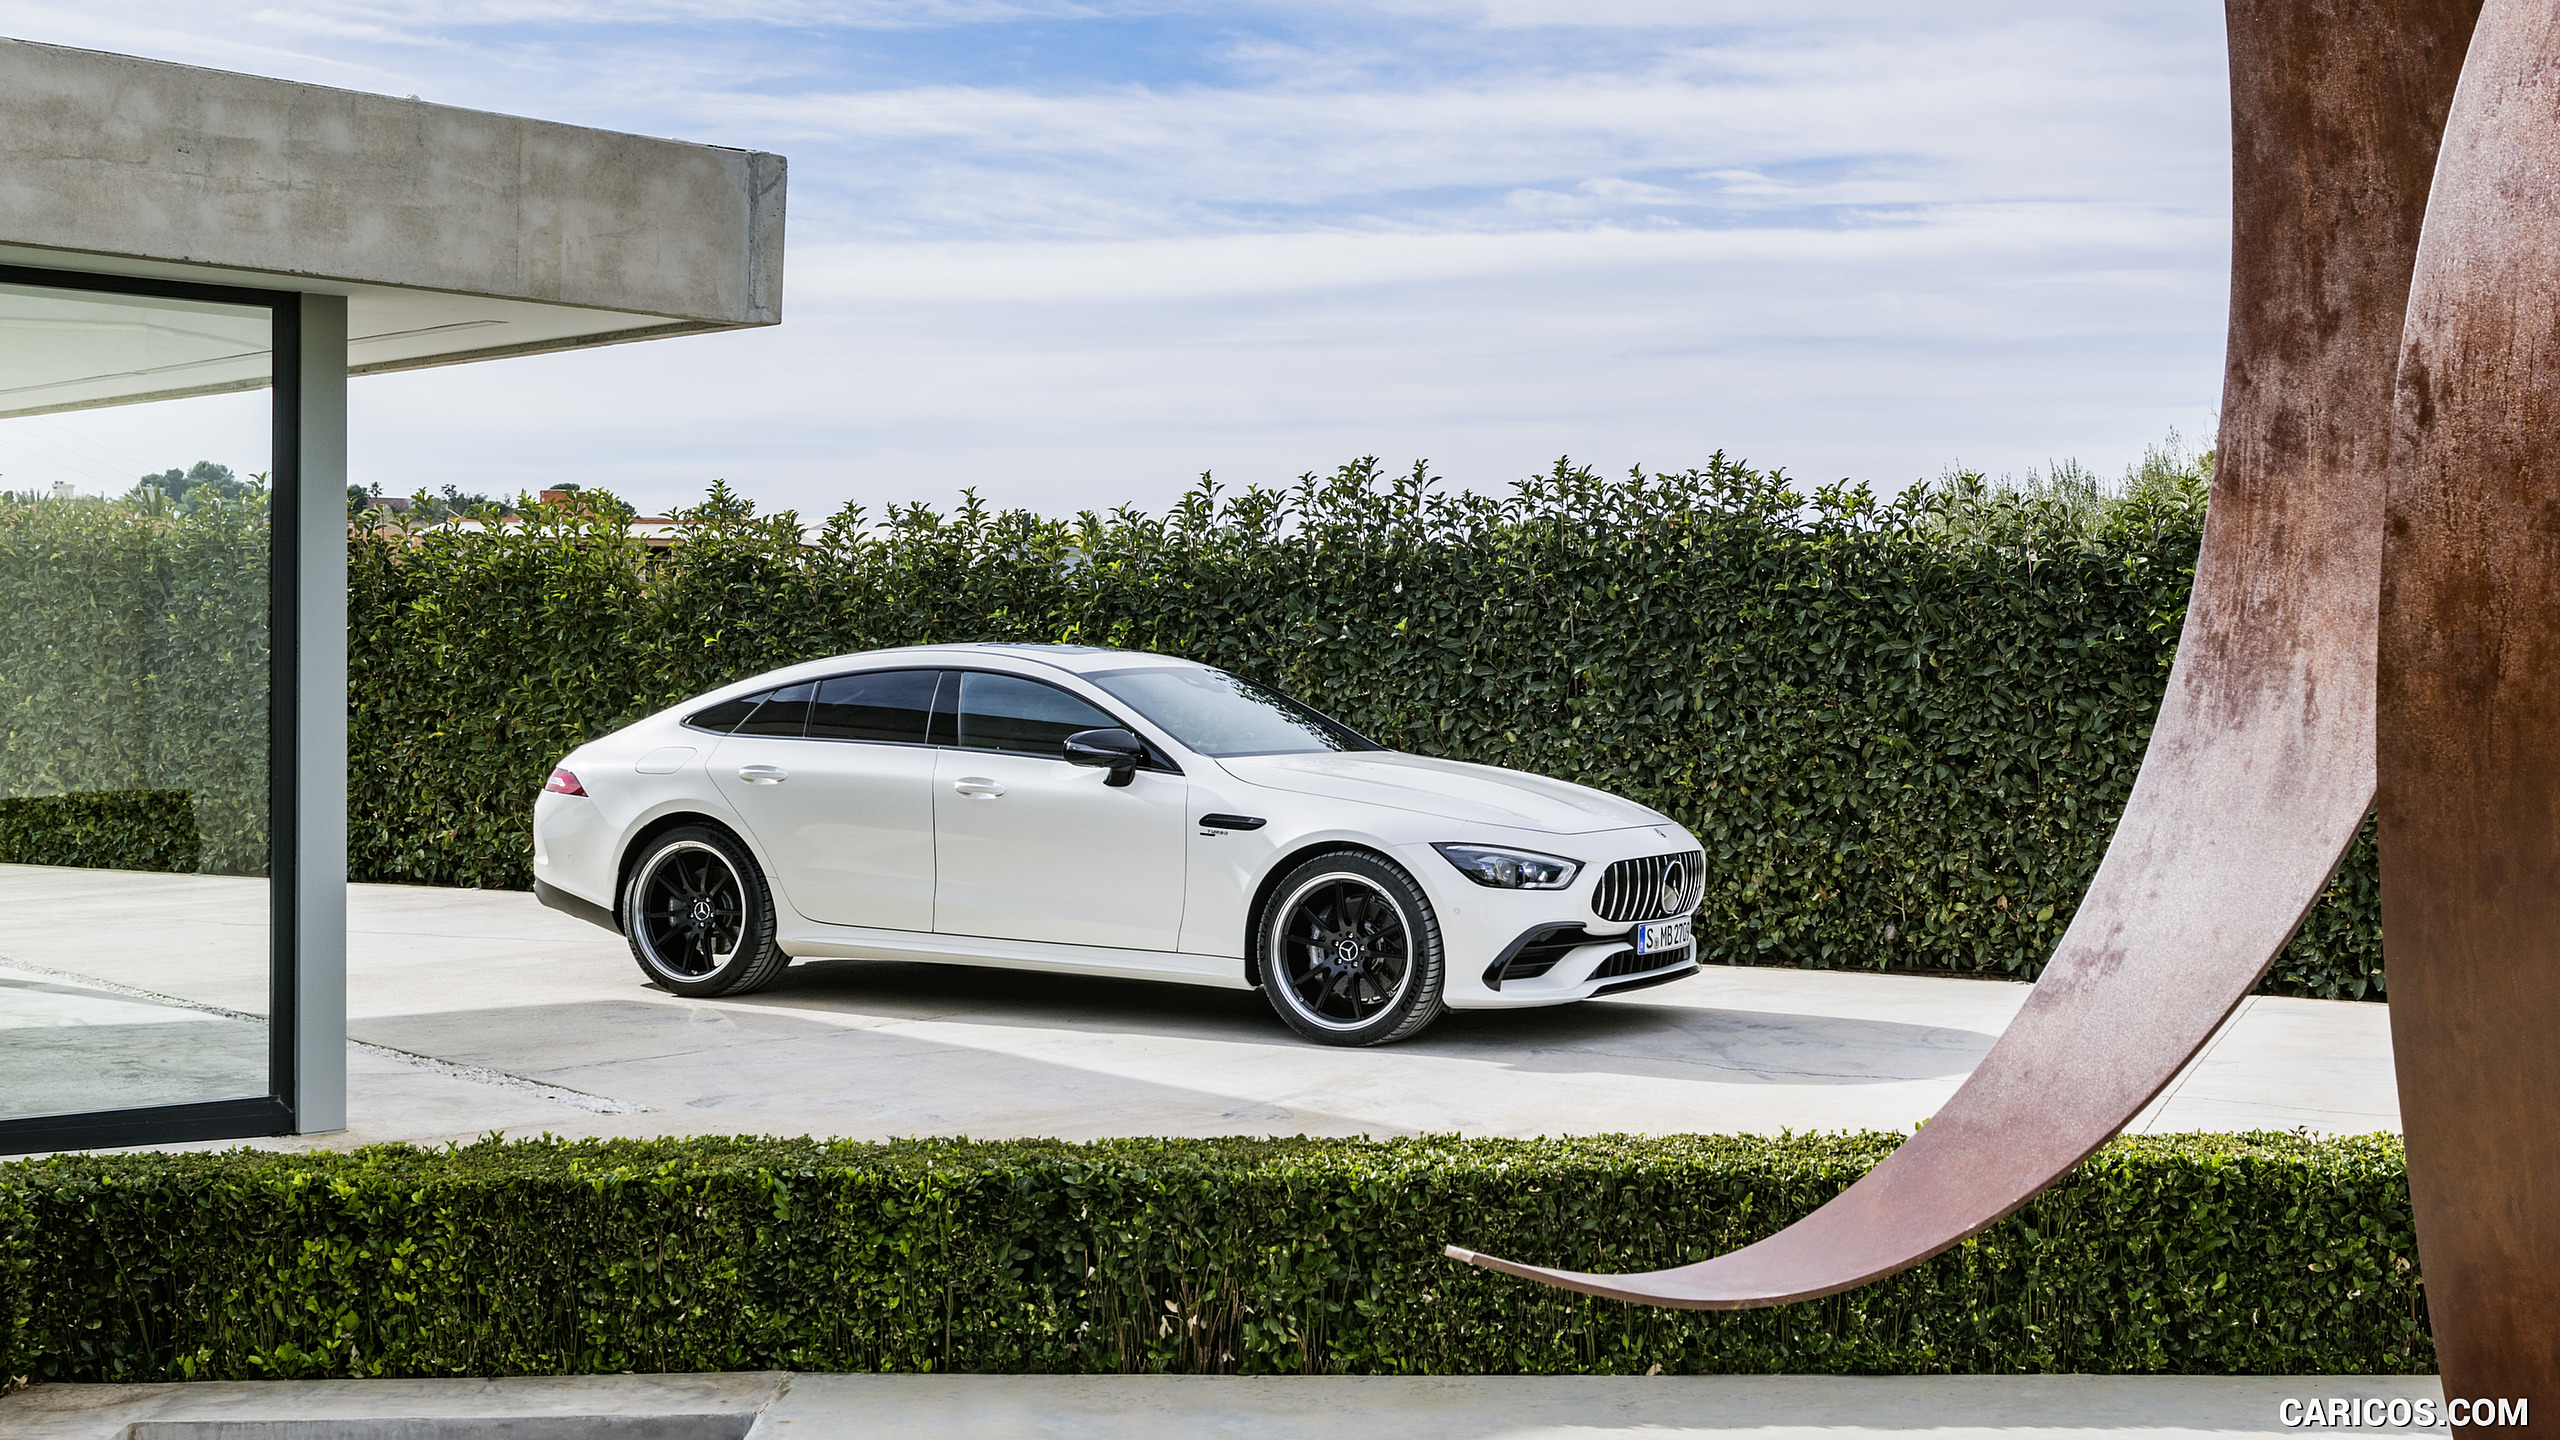 2019 Mercedes-AMG GT 53 4MATIC+ 4-Door Coupe (Color: Designo Diamond White Bright) - Side, #55 of 427